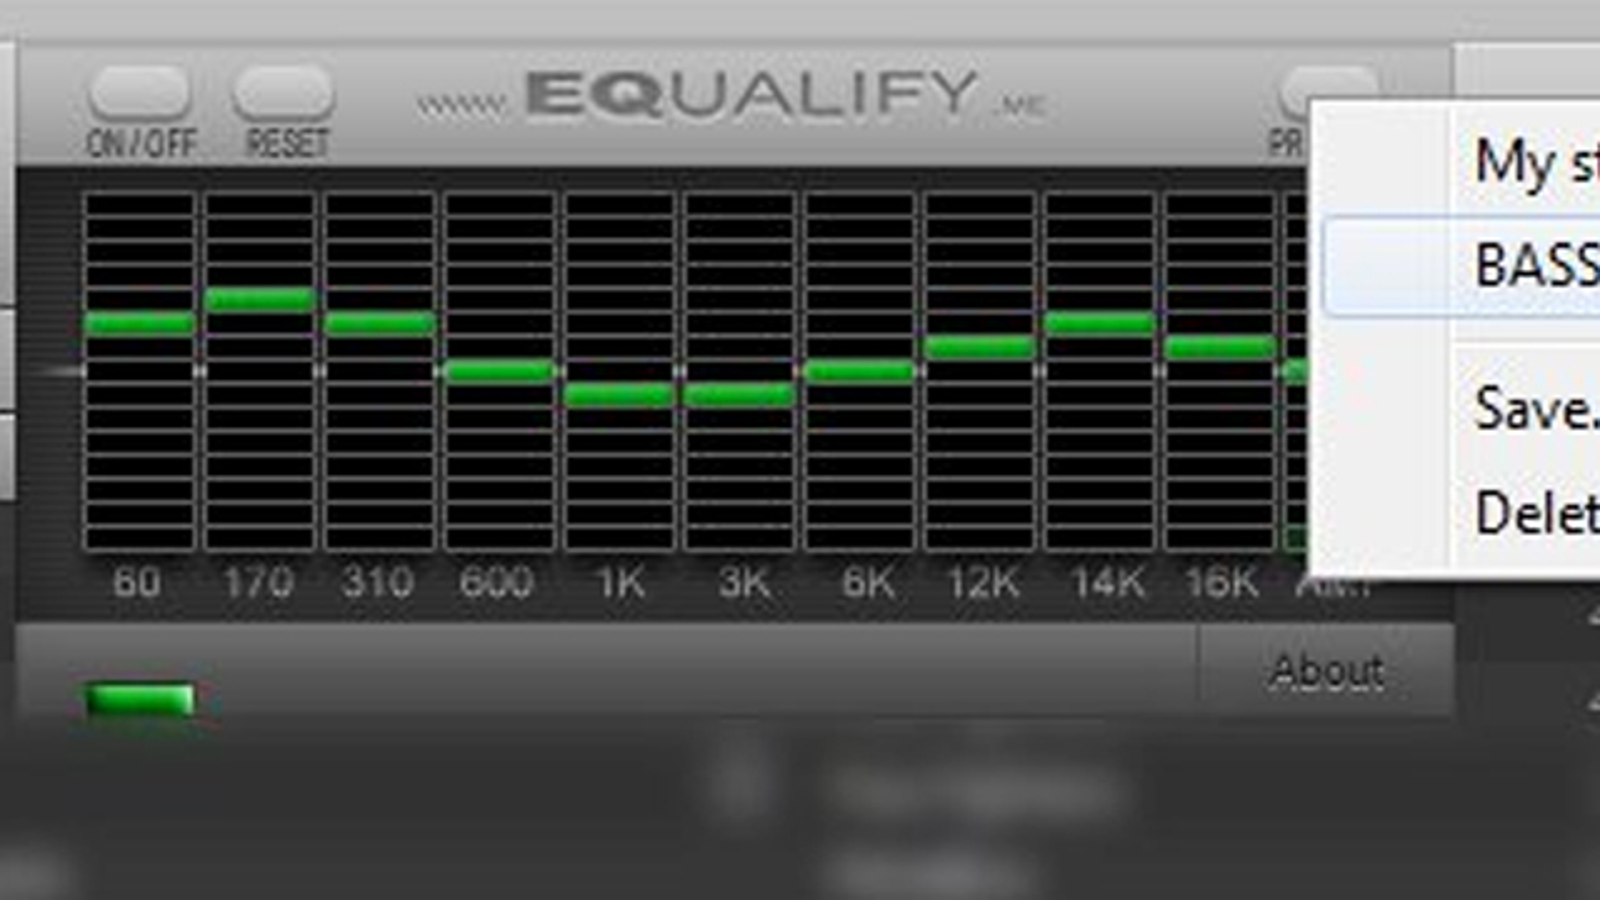 windows 10 equalizer not appearing